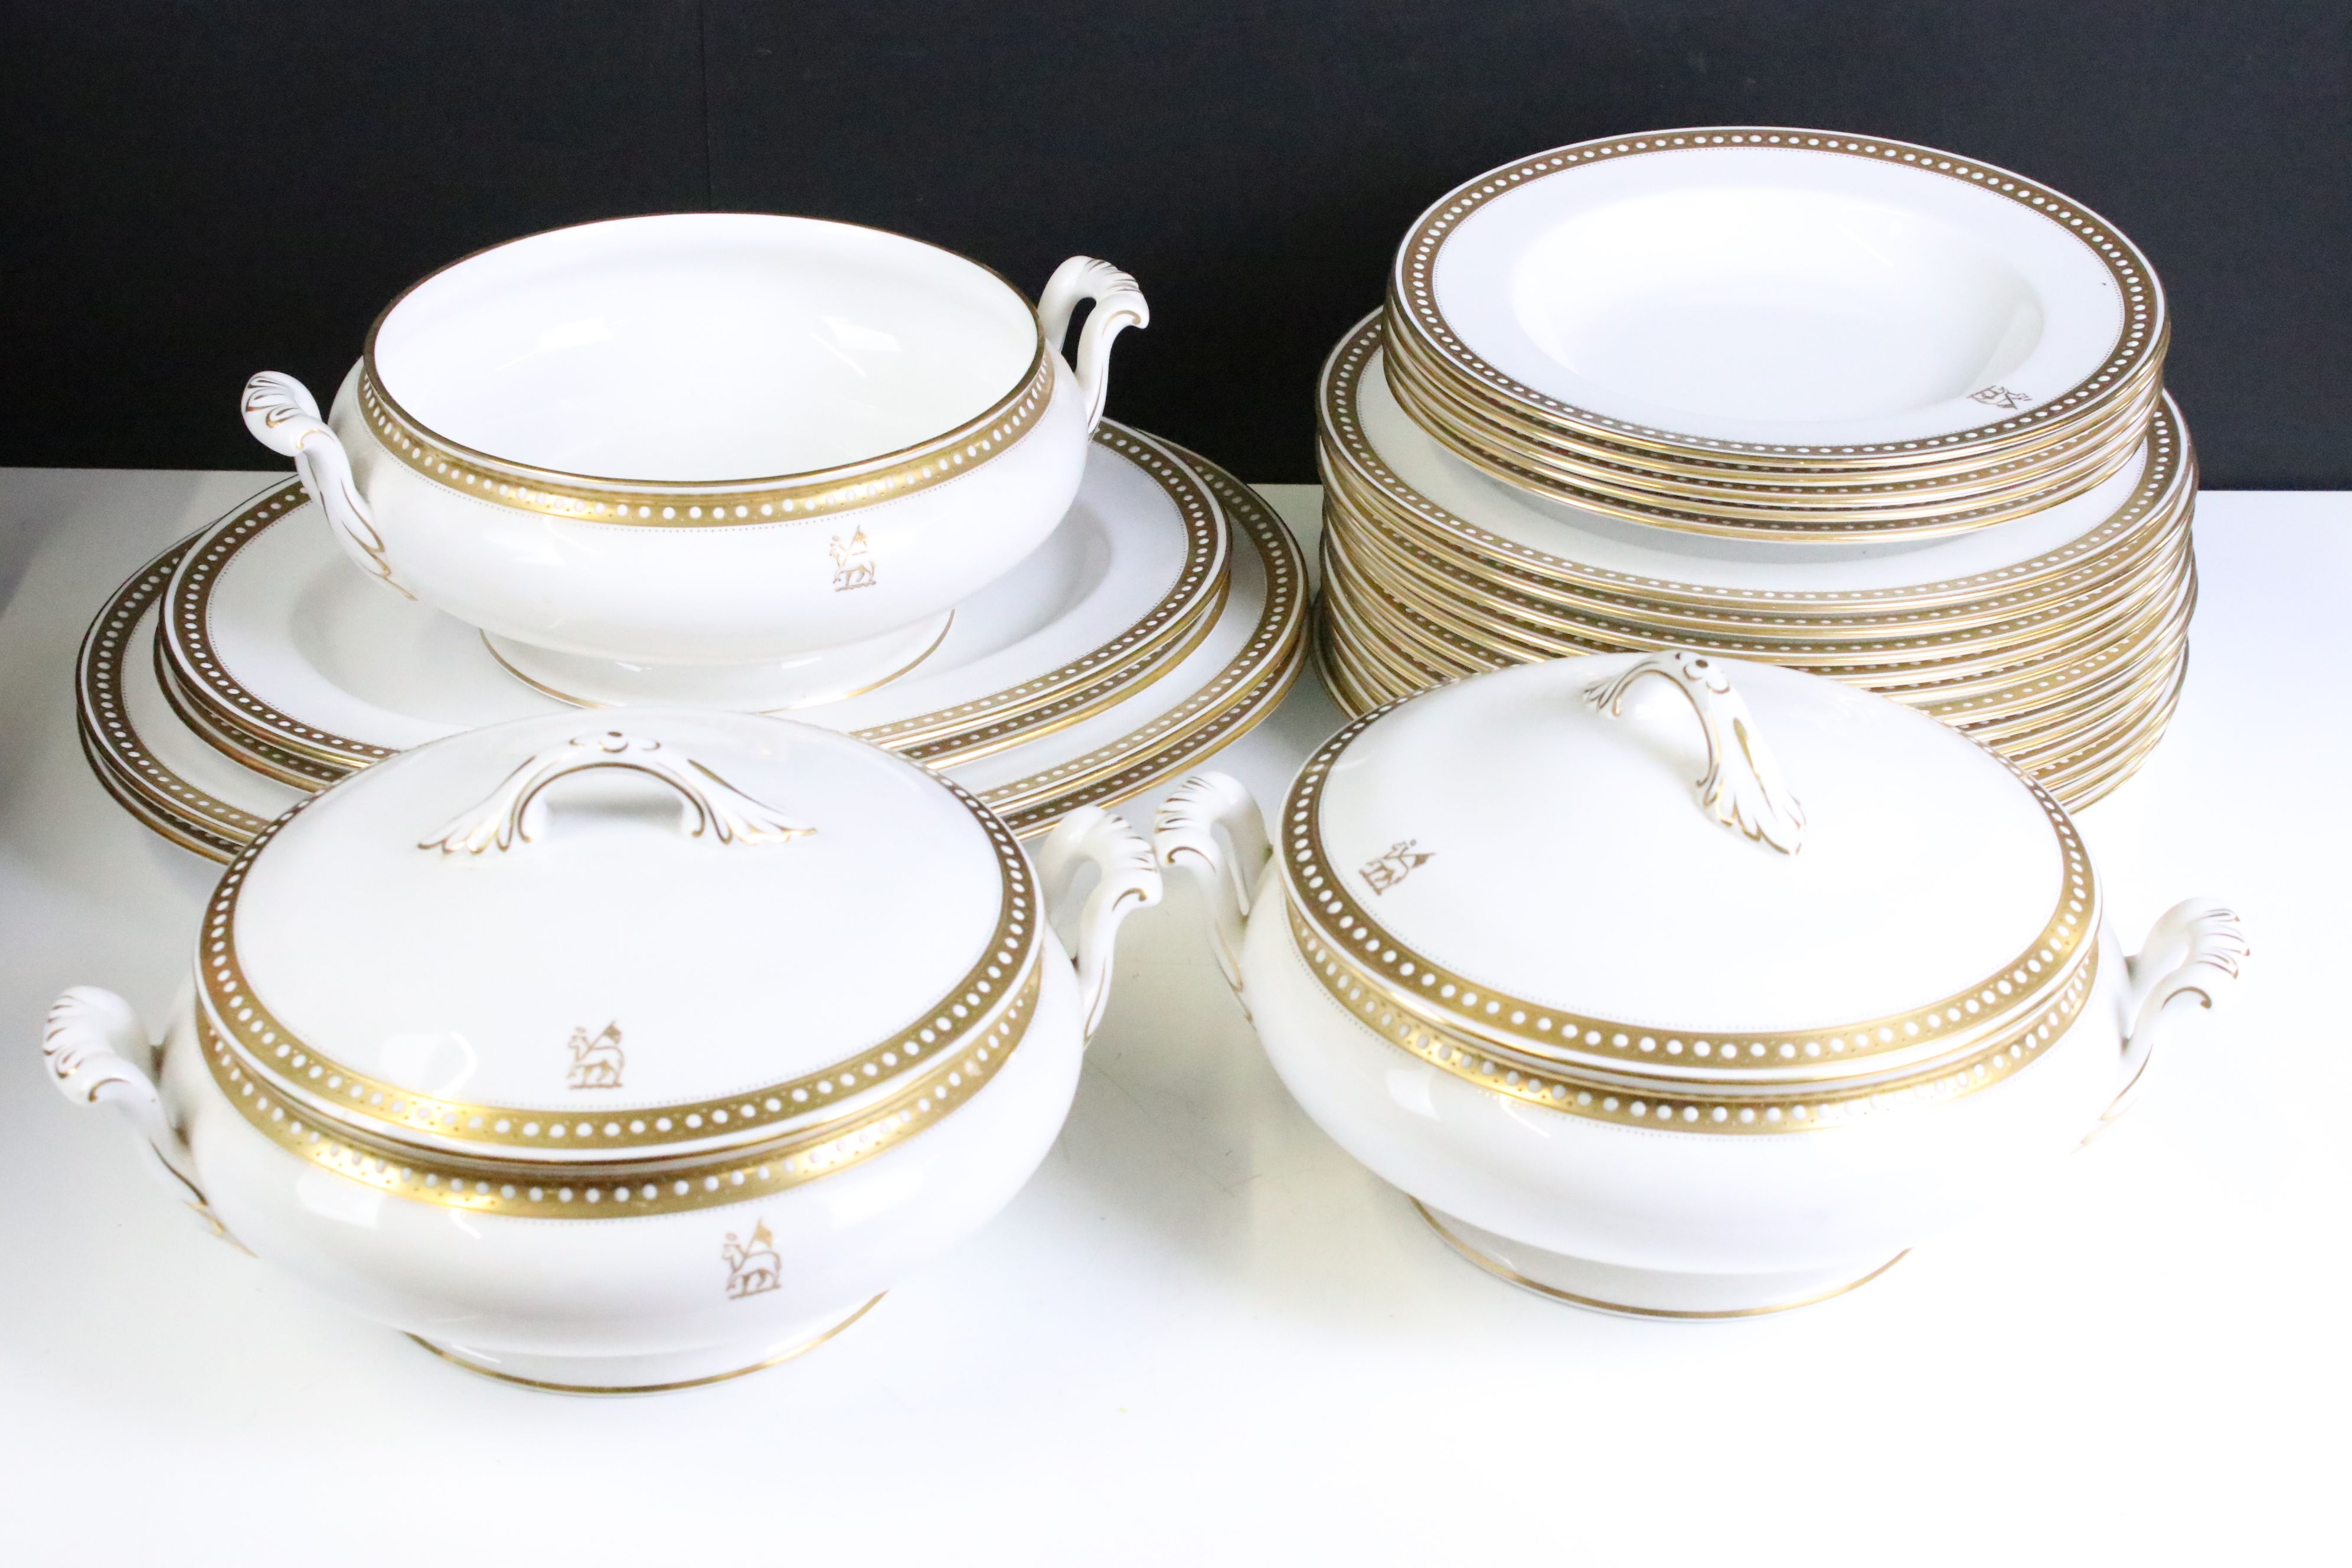 Early 20th Spode dinner service retailed by Thomas Goode & Co Ltd having a white ground with gilt